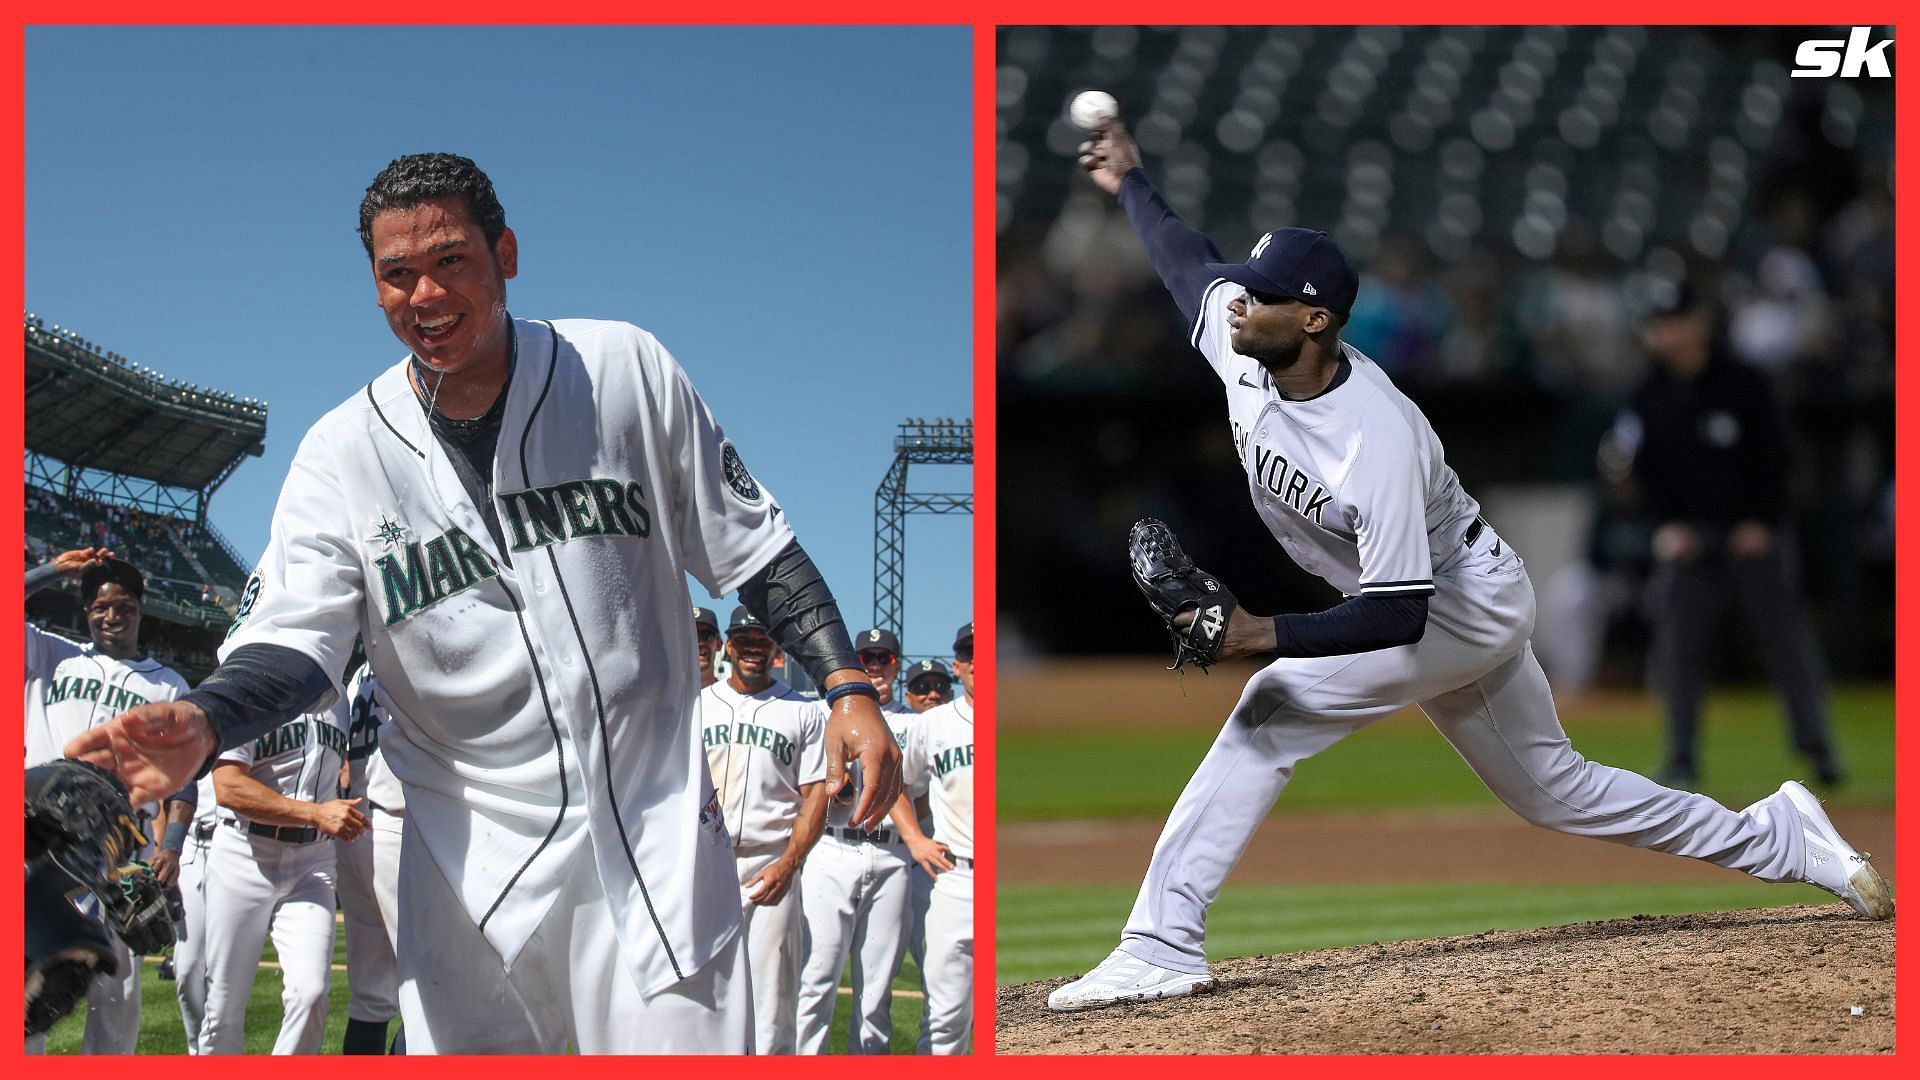 Starting pitcher Felix Hernandez of the Seattle Mariners was dowsed with water after throwing a perfect game against the Tampa Bay Rays in 2012